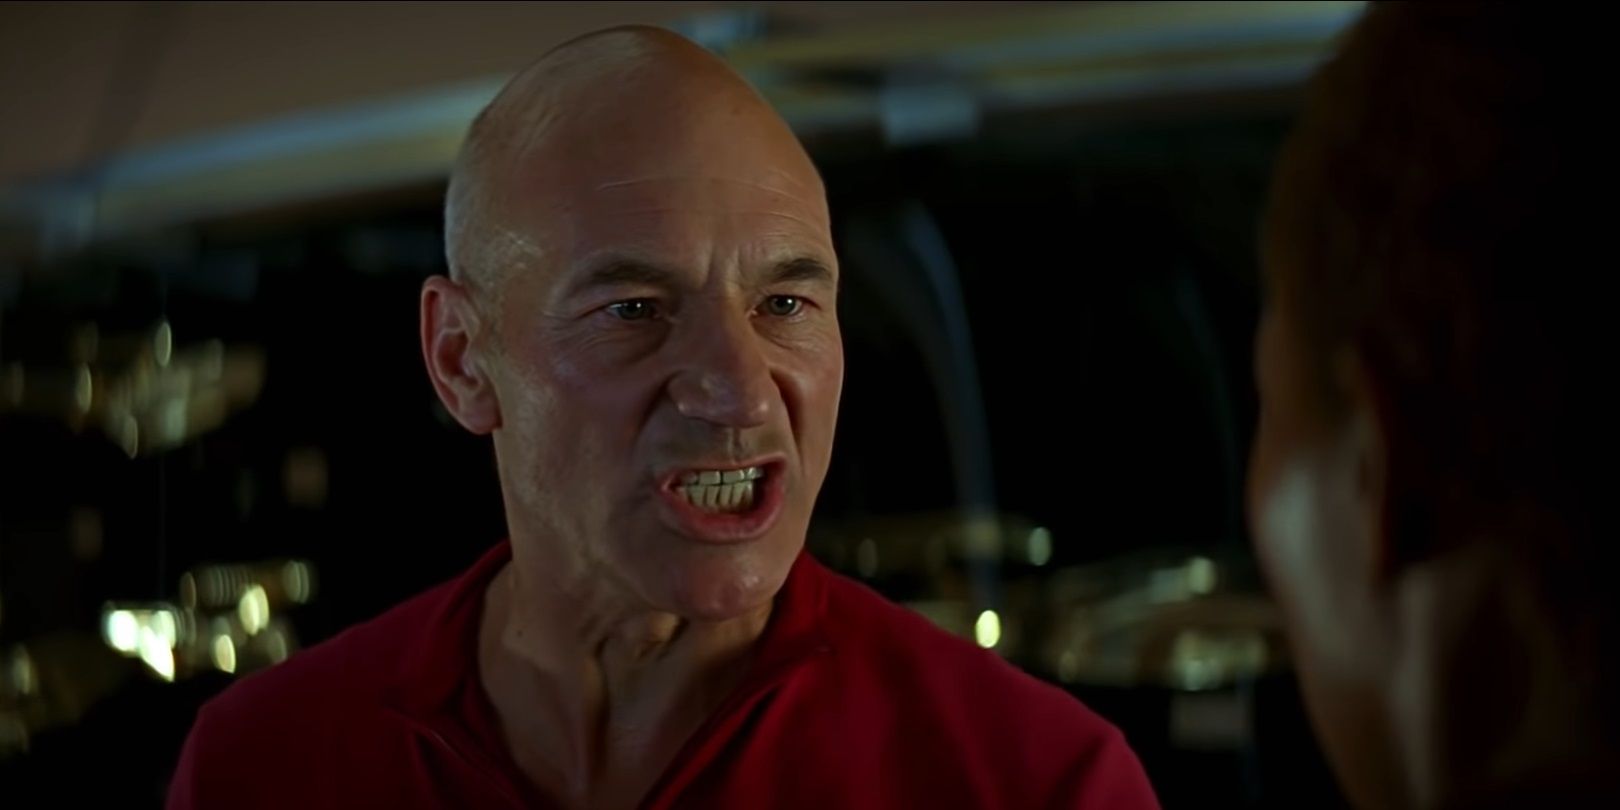 Picard in the movie First Contact.